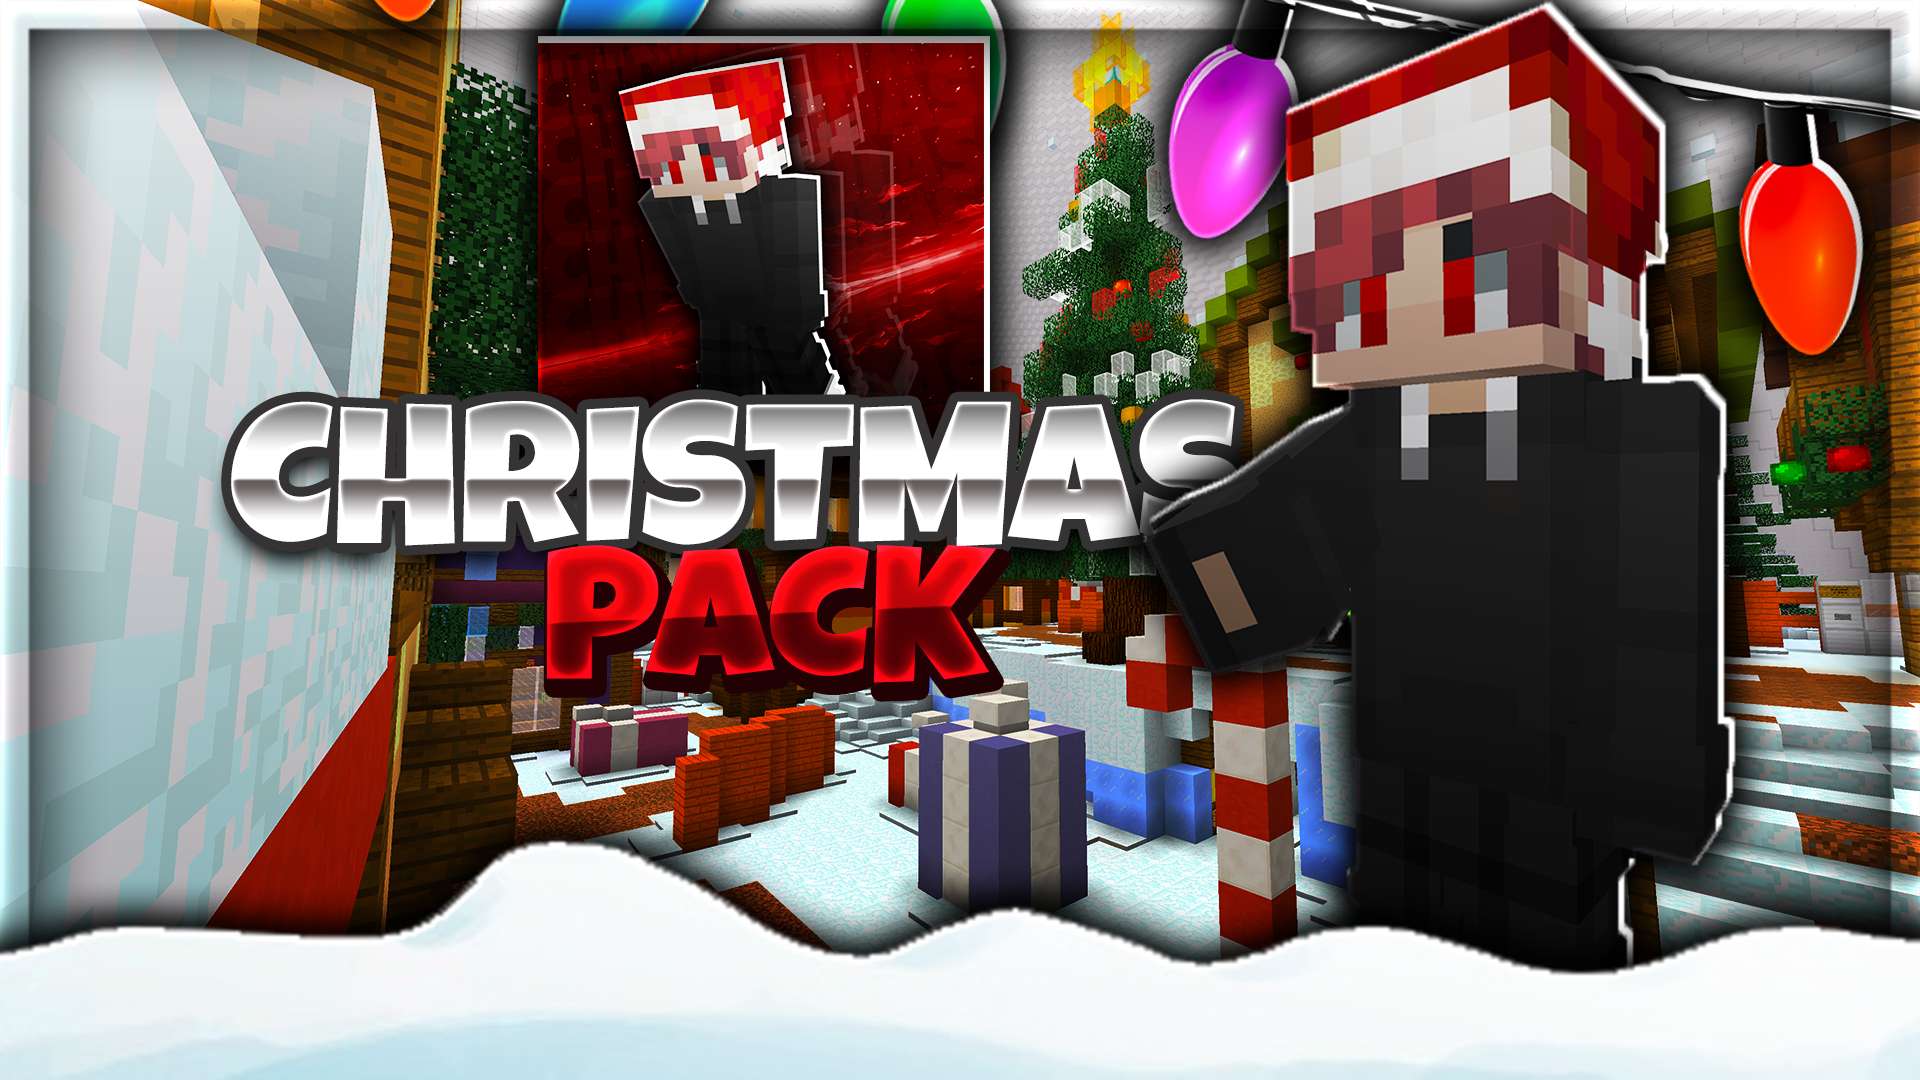 Christmas Pack  16x by BladezzPack on PvPRP